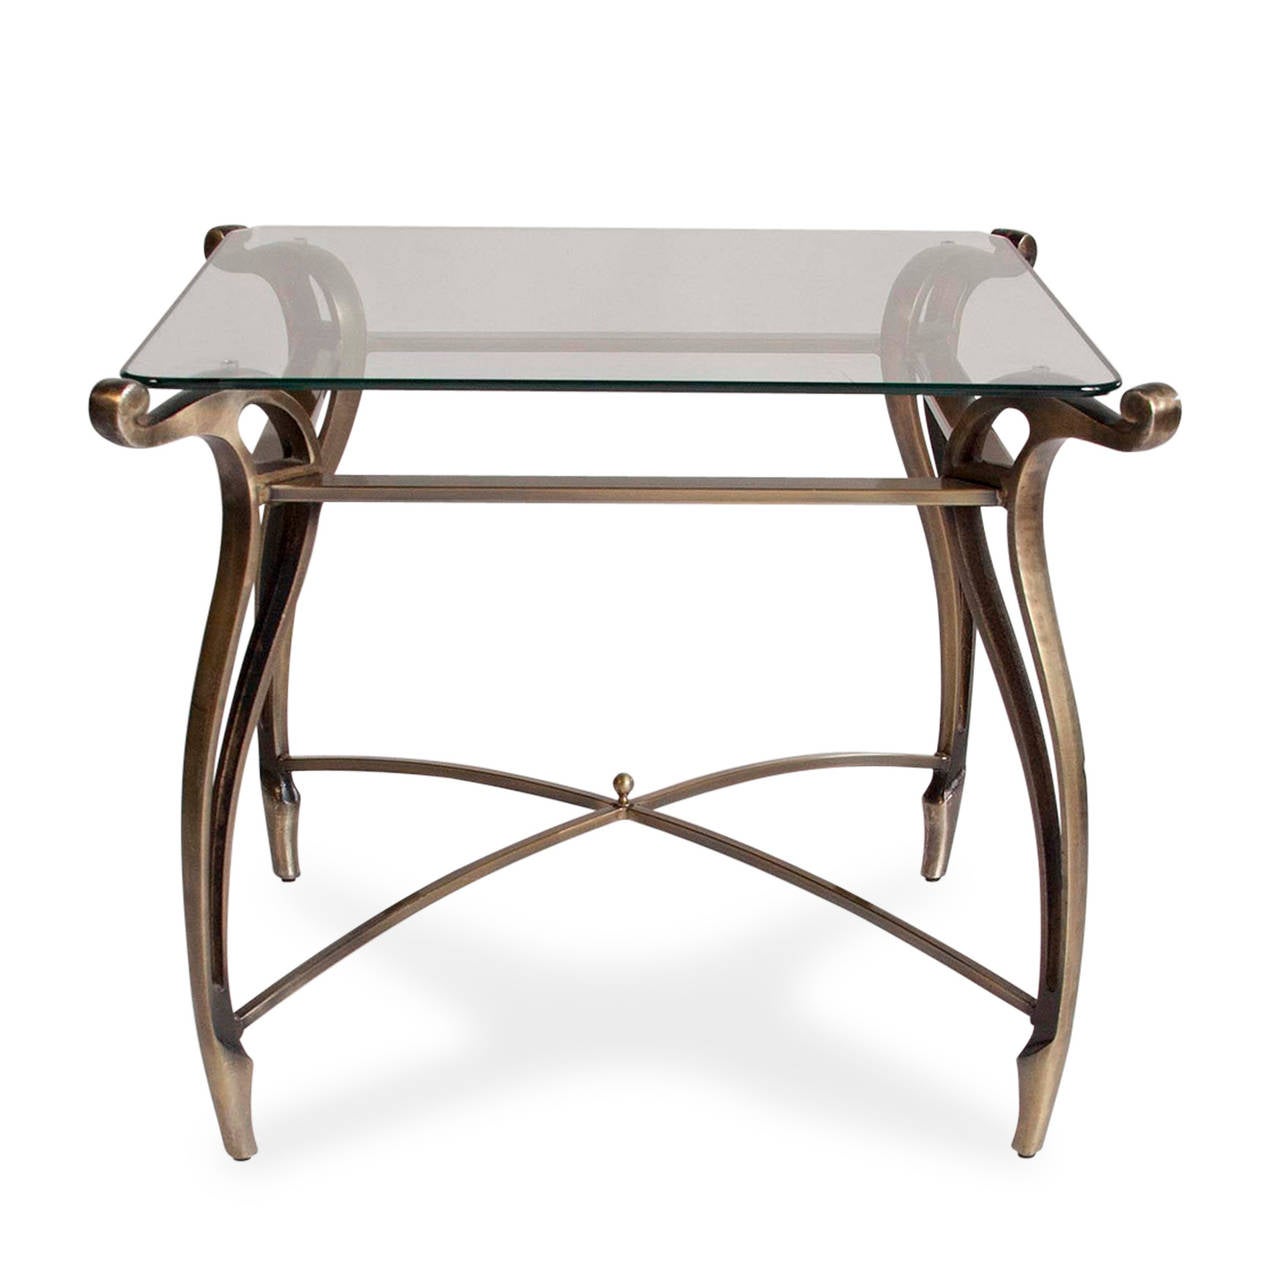 Bronze and glass top square occasional table, the legs elegantly curving outward and terminating at the top in a scroll form, the glass inset from the edge, X-stretcher with ball element at cross, American circa 1980. 30 1/4 square from outside